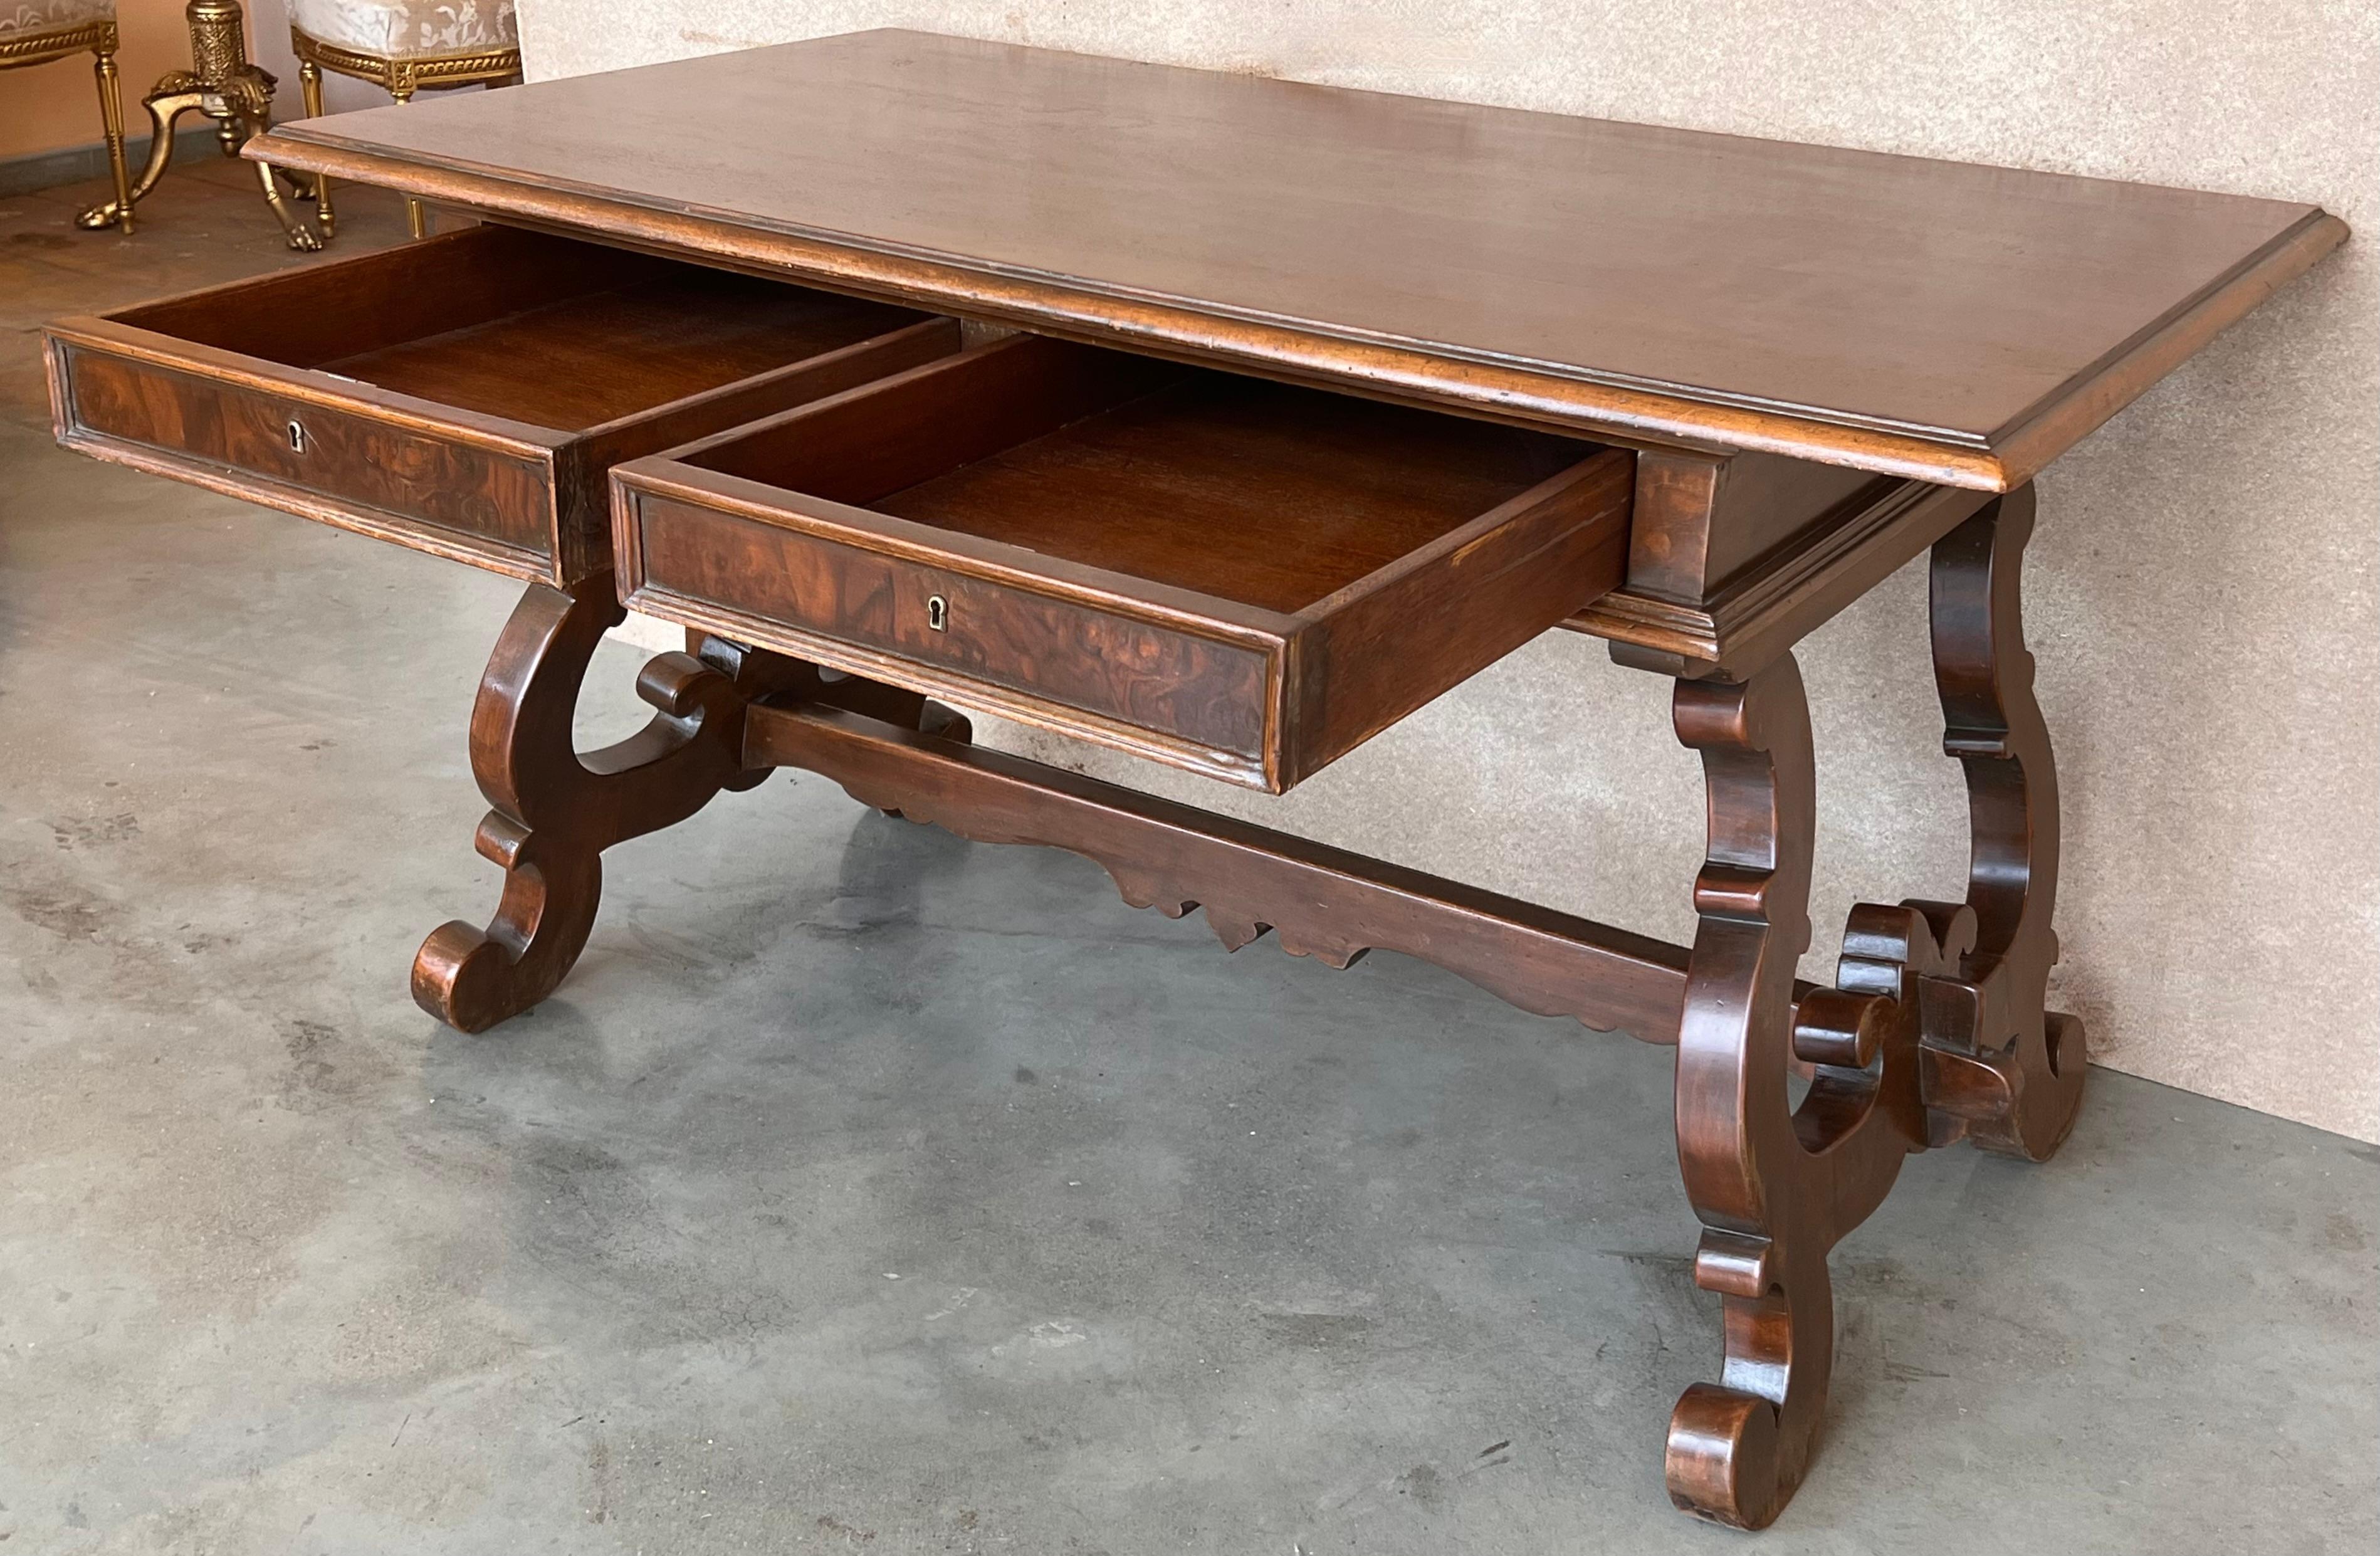 20th Century Spanish Carved Walnut House Desk with Lyre Legs For Sale 4